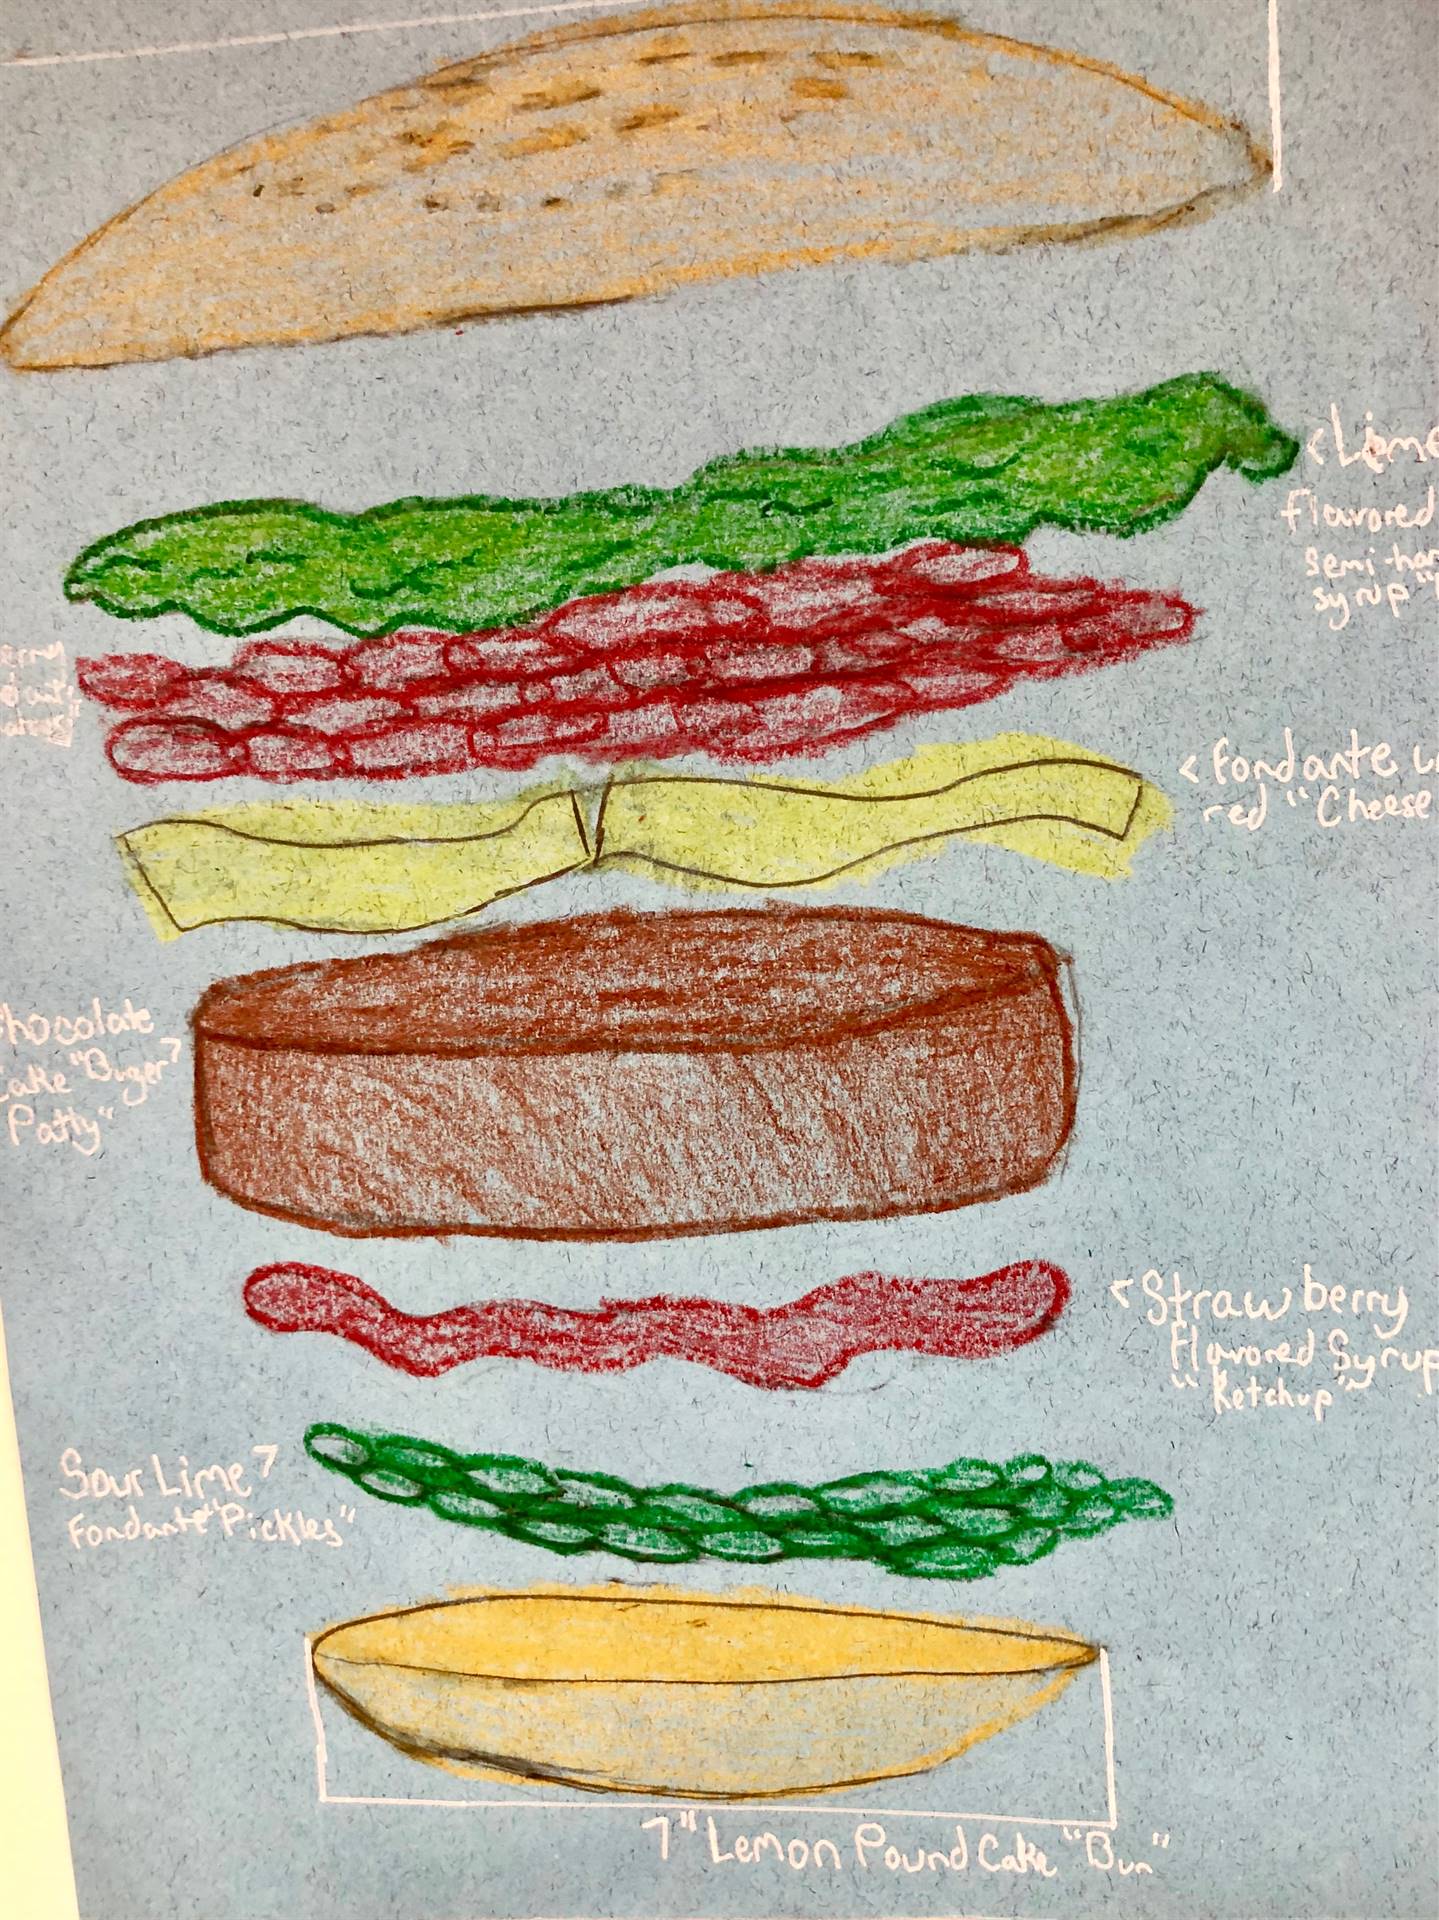 Drawing of food in blueprint style